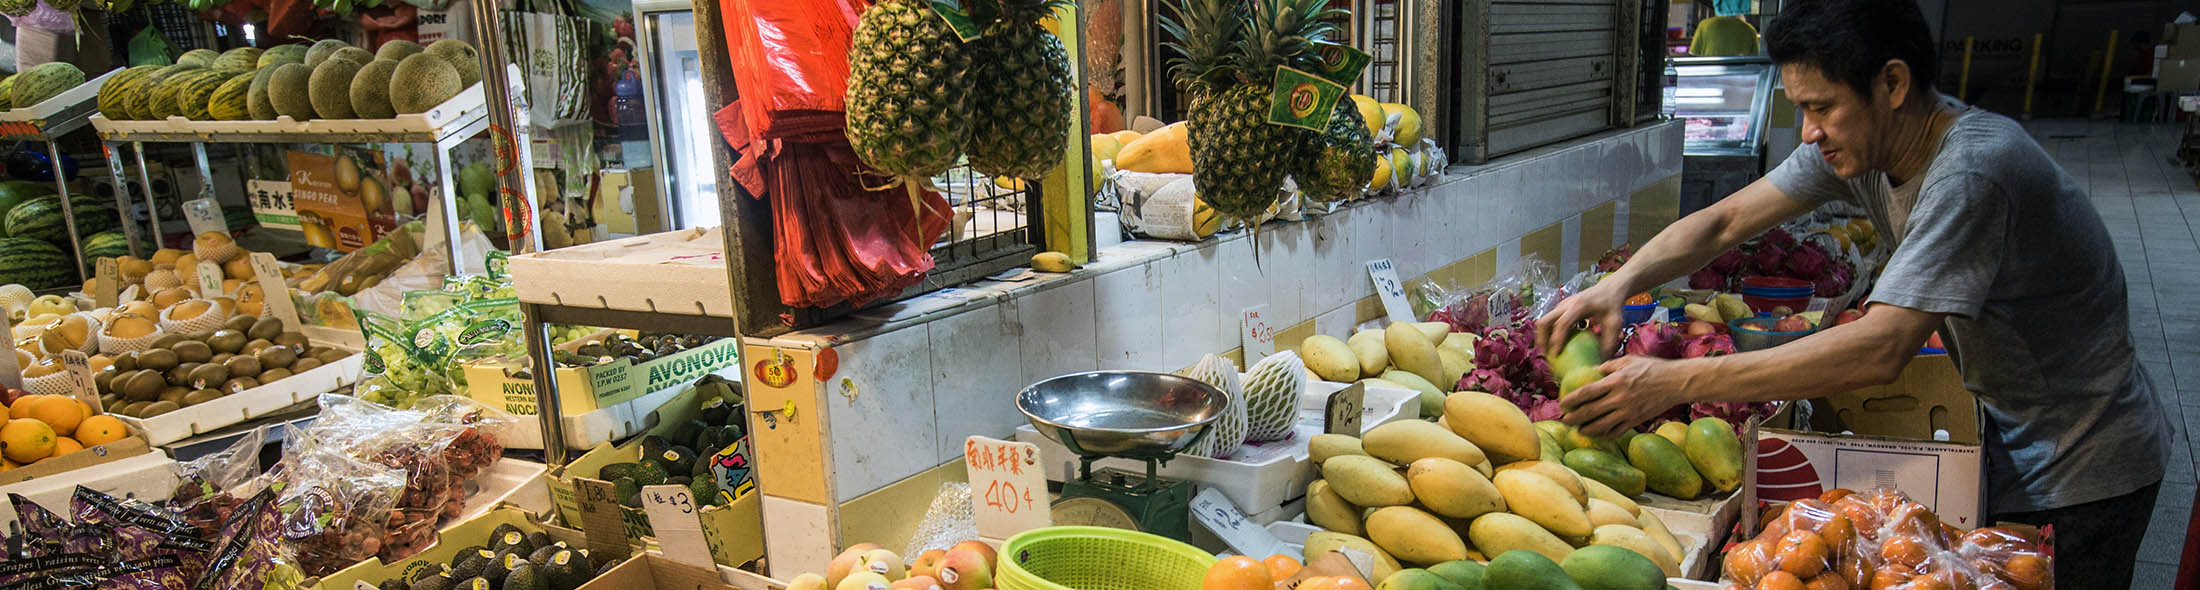 A vendor arranges fruit at a stall inside the Chinatown Wet Market in Singapore, on Wednesday, Nov. 4, 2015. The Monetary Authority of Singapore eased monetary policy for the second time this year last month, as trade ministry data showed the economy narrowly avoided a technical recession, saying weakening prospects for global growth will pose “headwinds” in the coming months.
